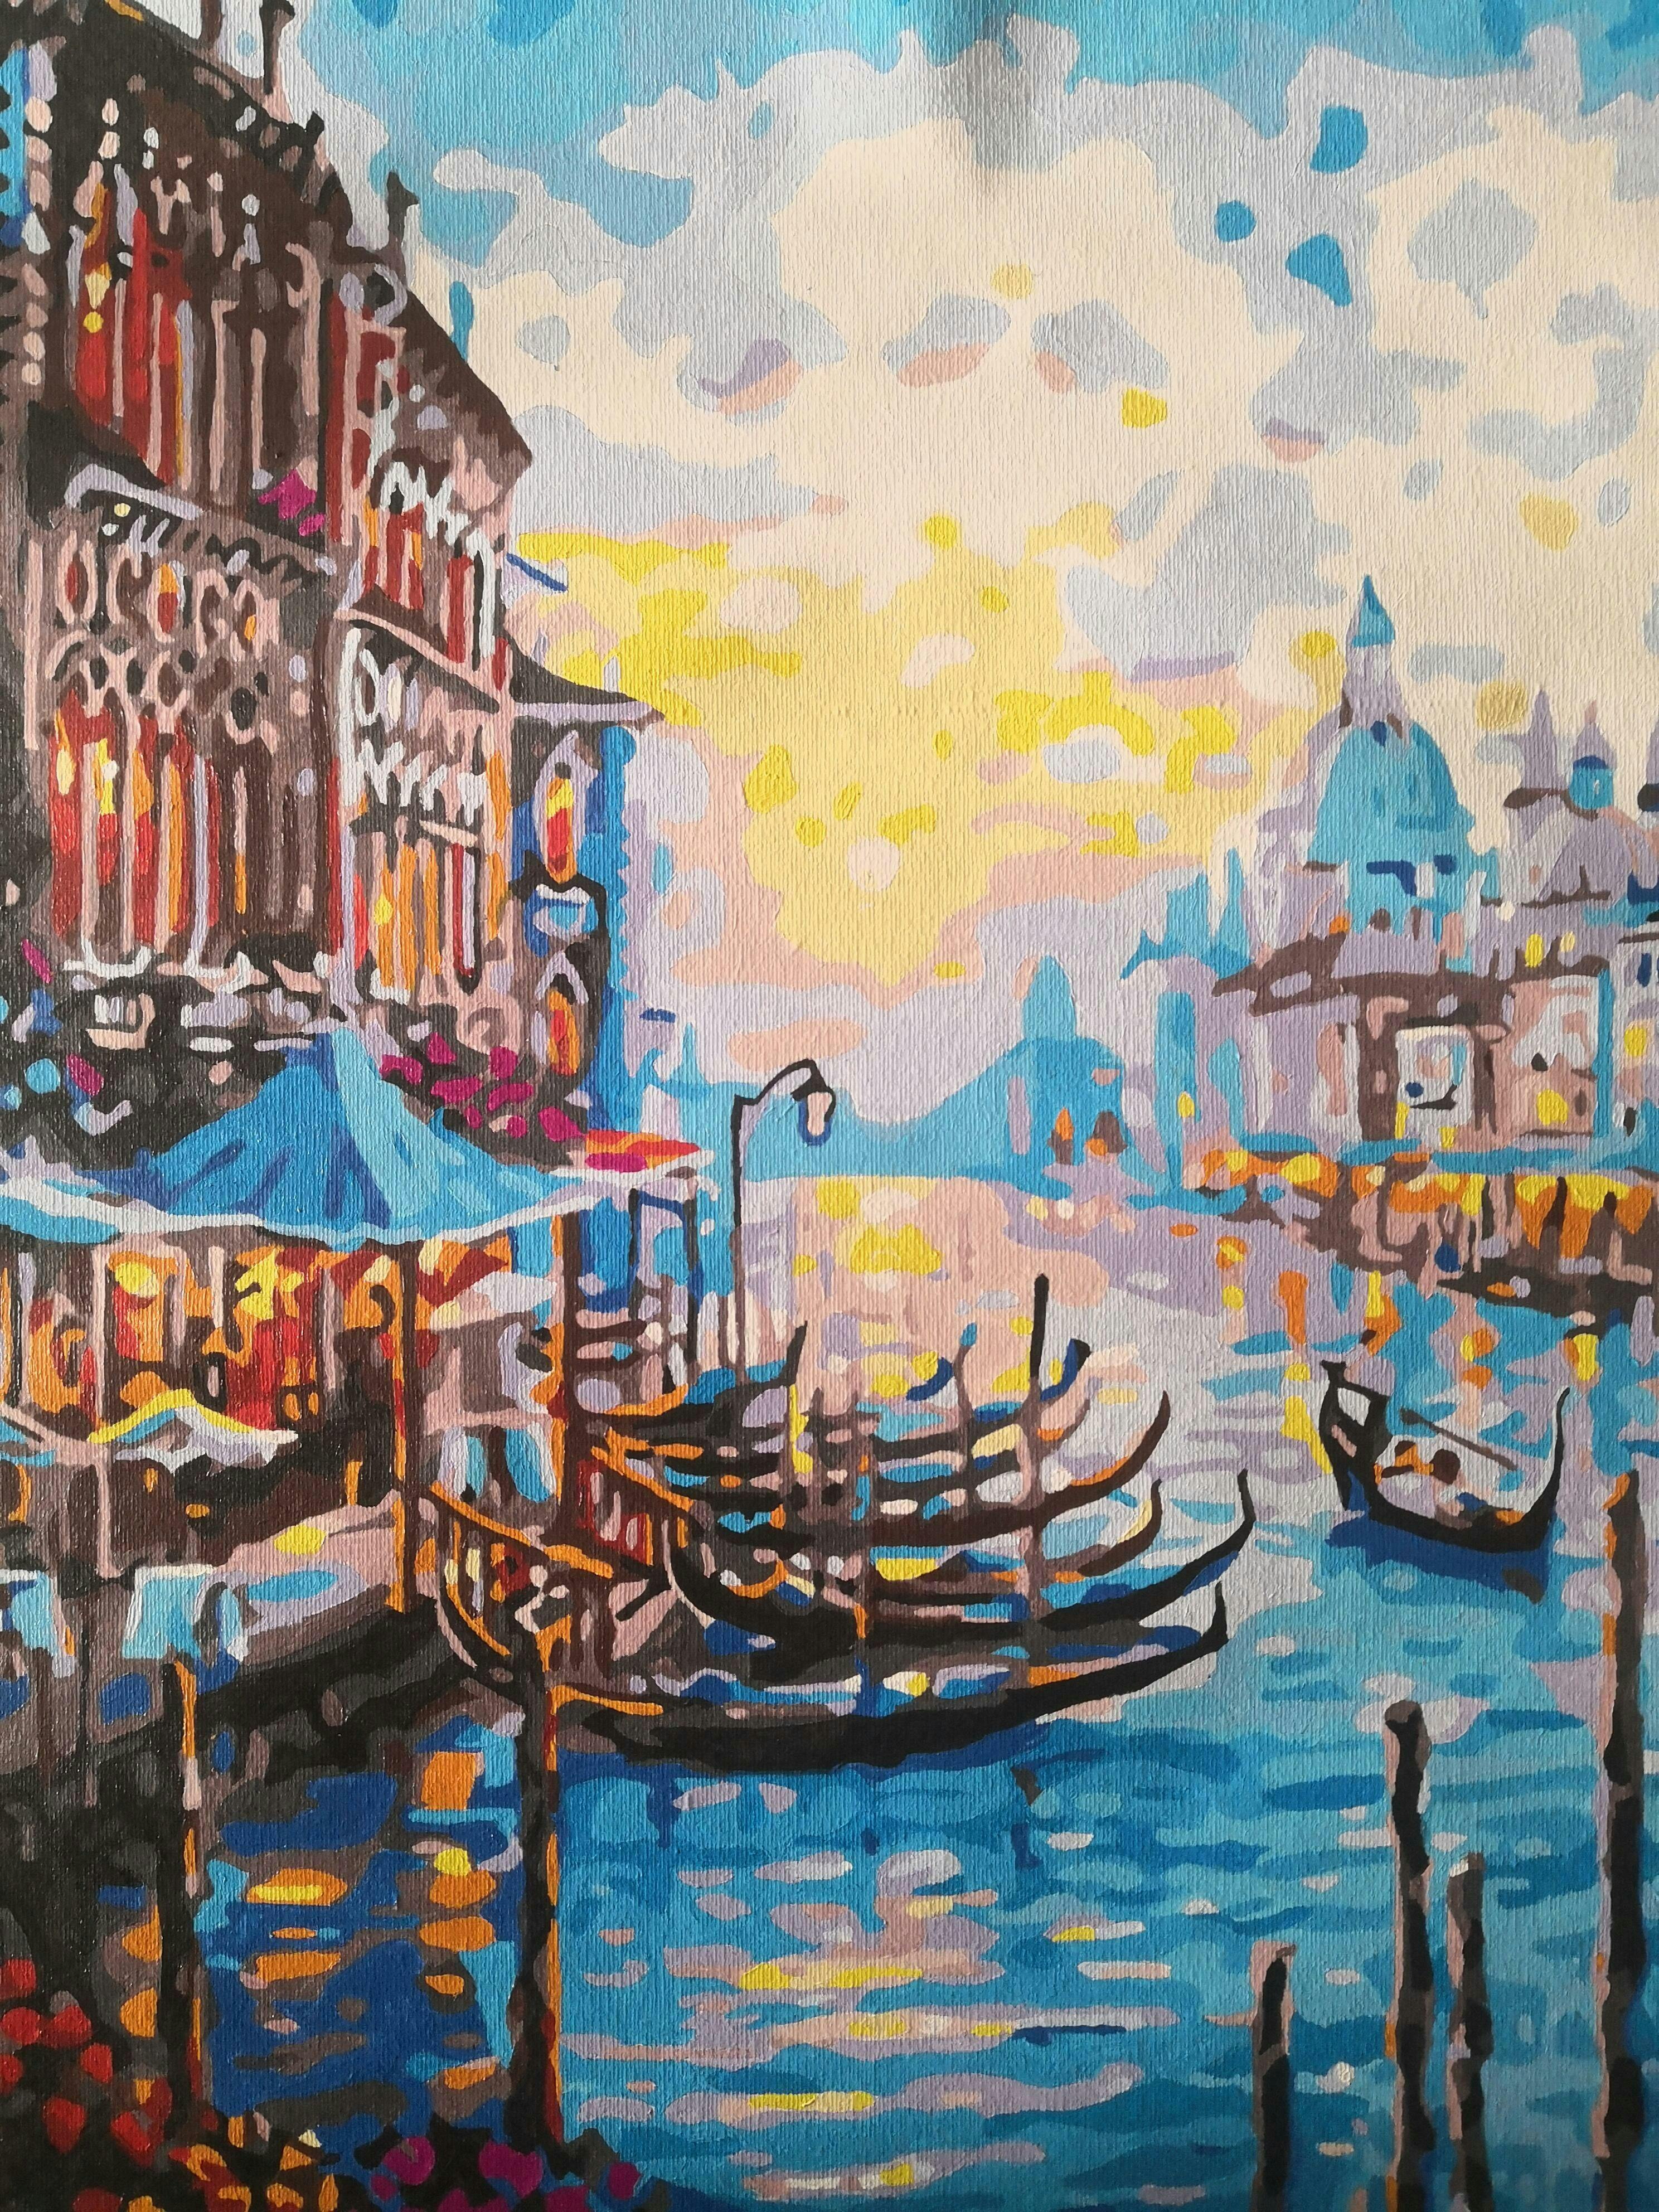 Venice Canal DIY Oil Acrylic Painting Kit Paint By Numbers with